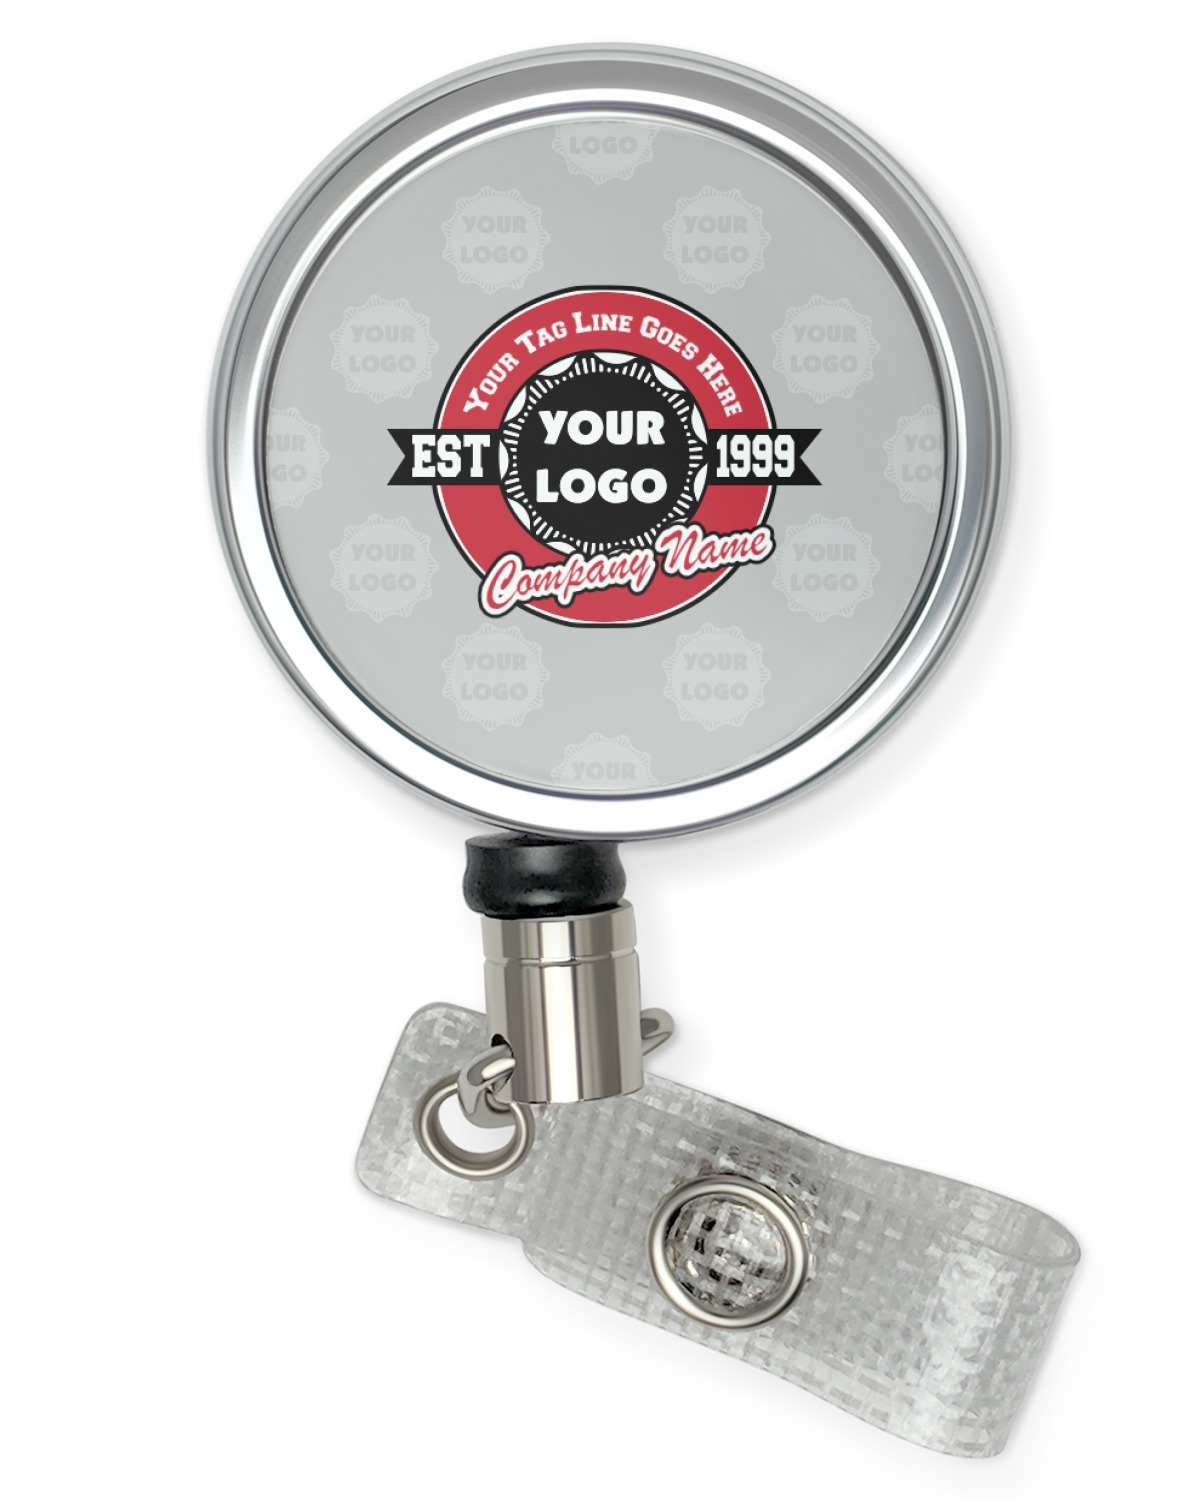 Custom Printed Retractable Badge Reels with Belt Clip - Personalize with Your Brand Logo